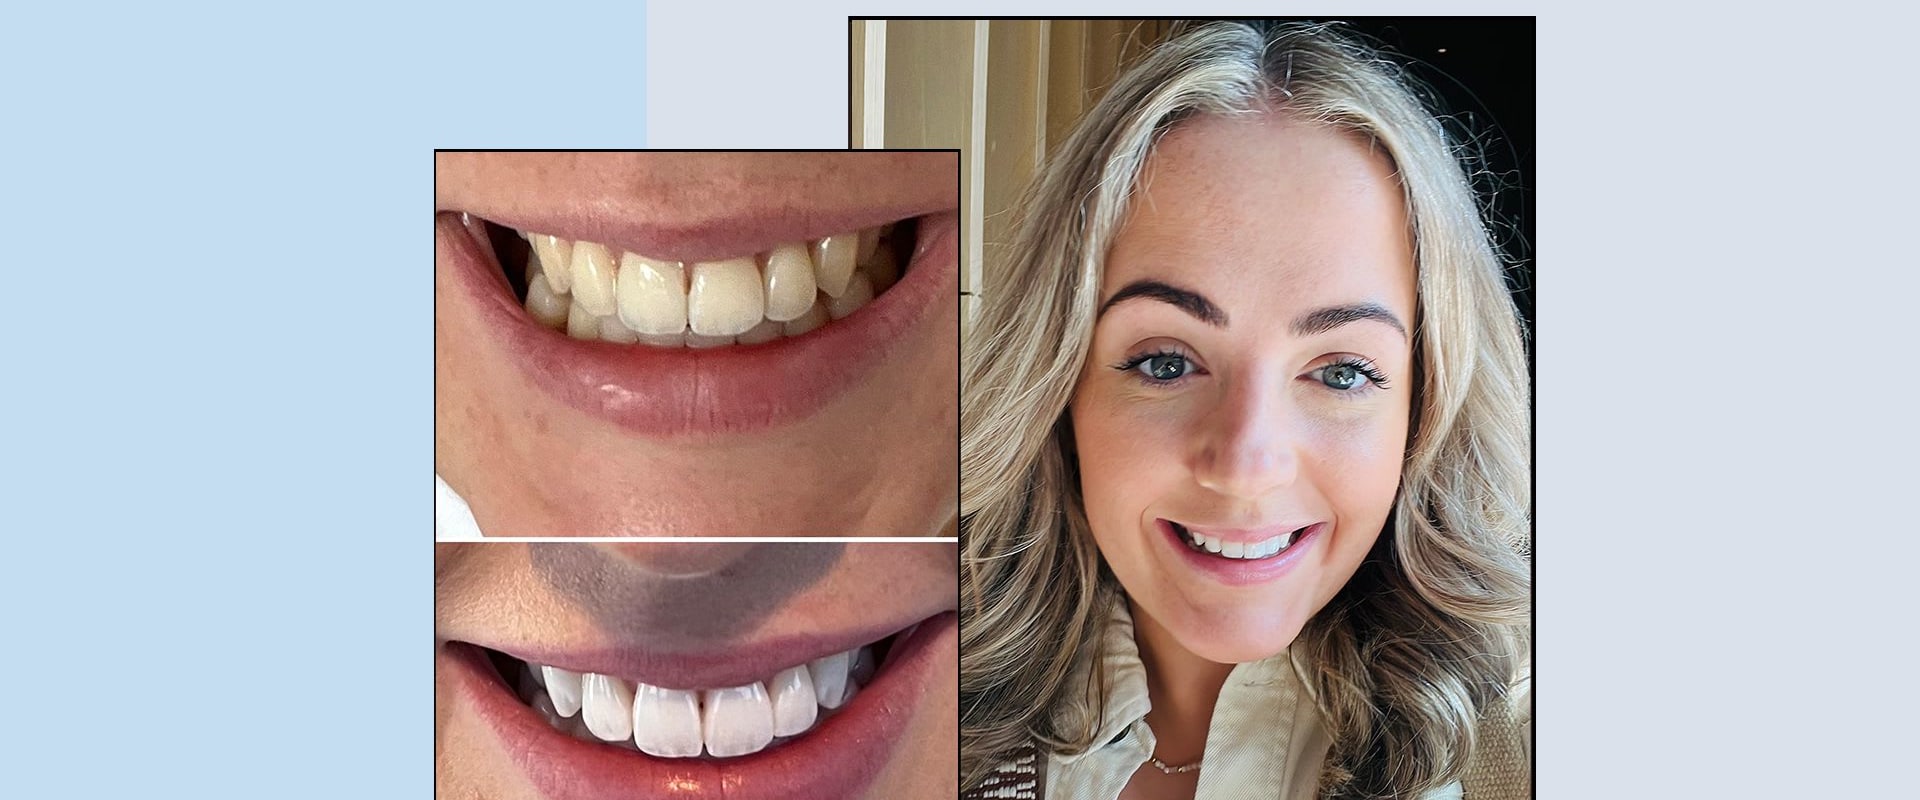 Smile Makeover vs Teeth Whitening: What's the Difference?